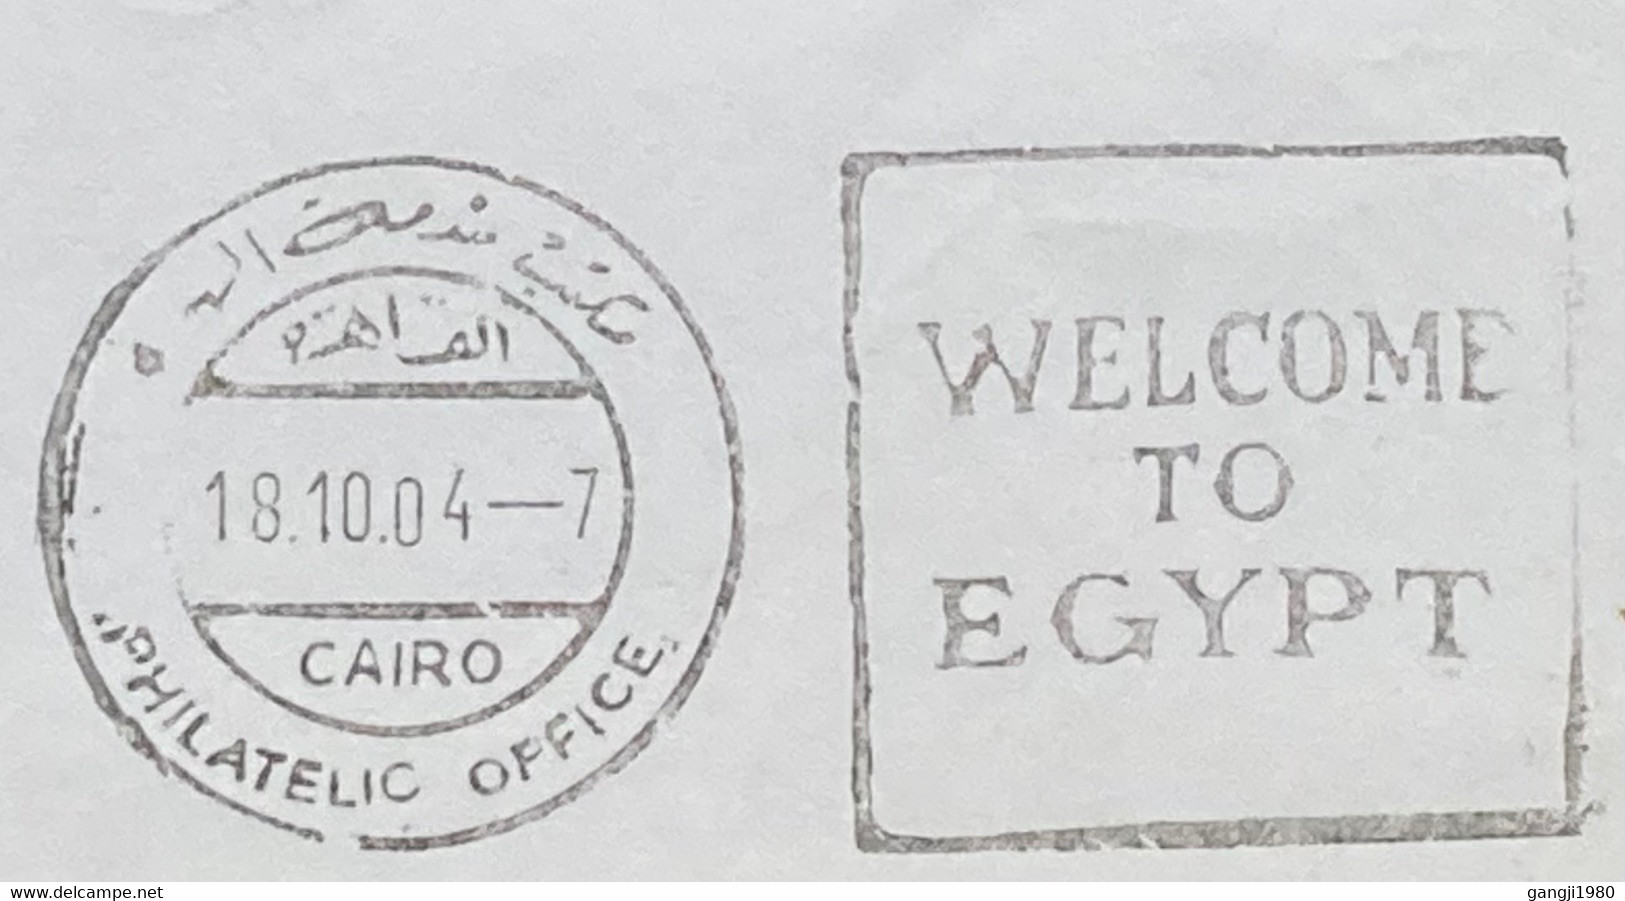 EGYPT 2004, USED COVER TO INDIA,  MISSENT TO BANGKOK THAILAND, BOXED, WELCOME TO EGYPT,  MACHINE SLOGAN - Briefe U. Dokumente